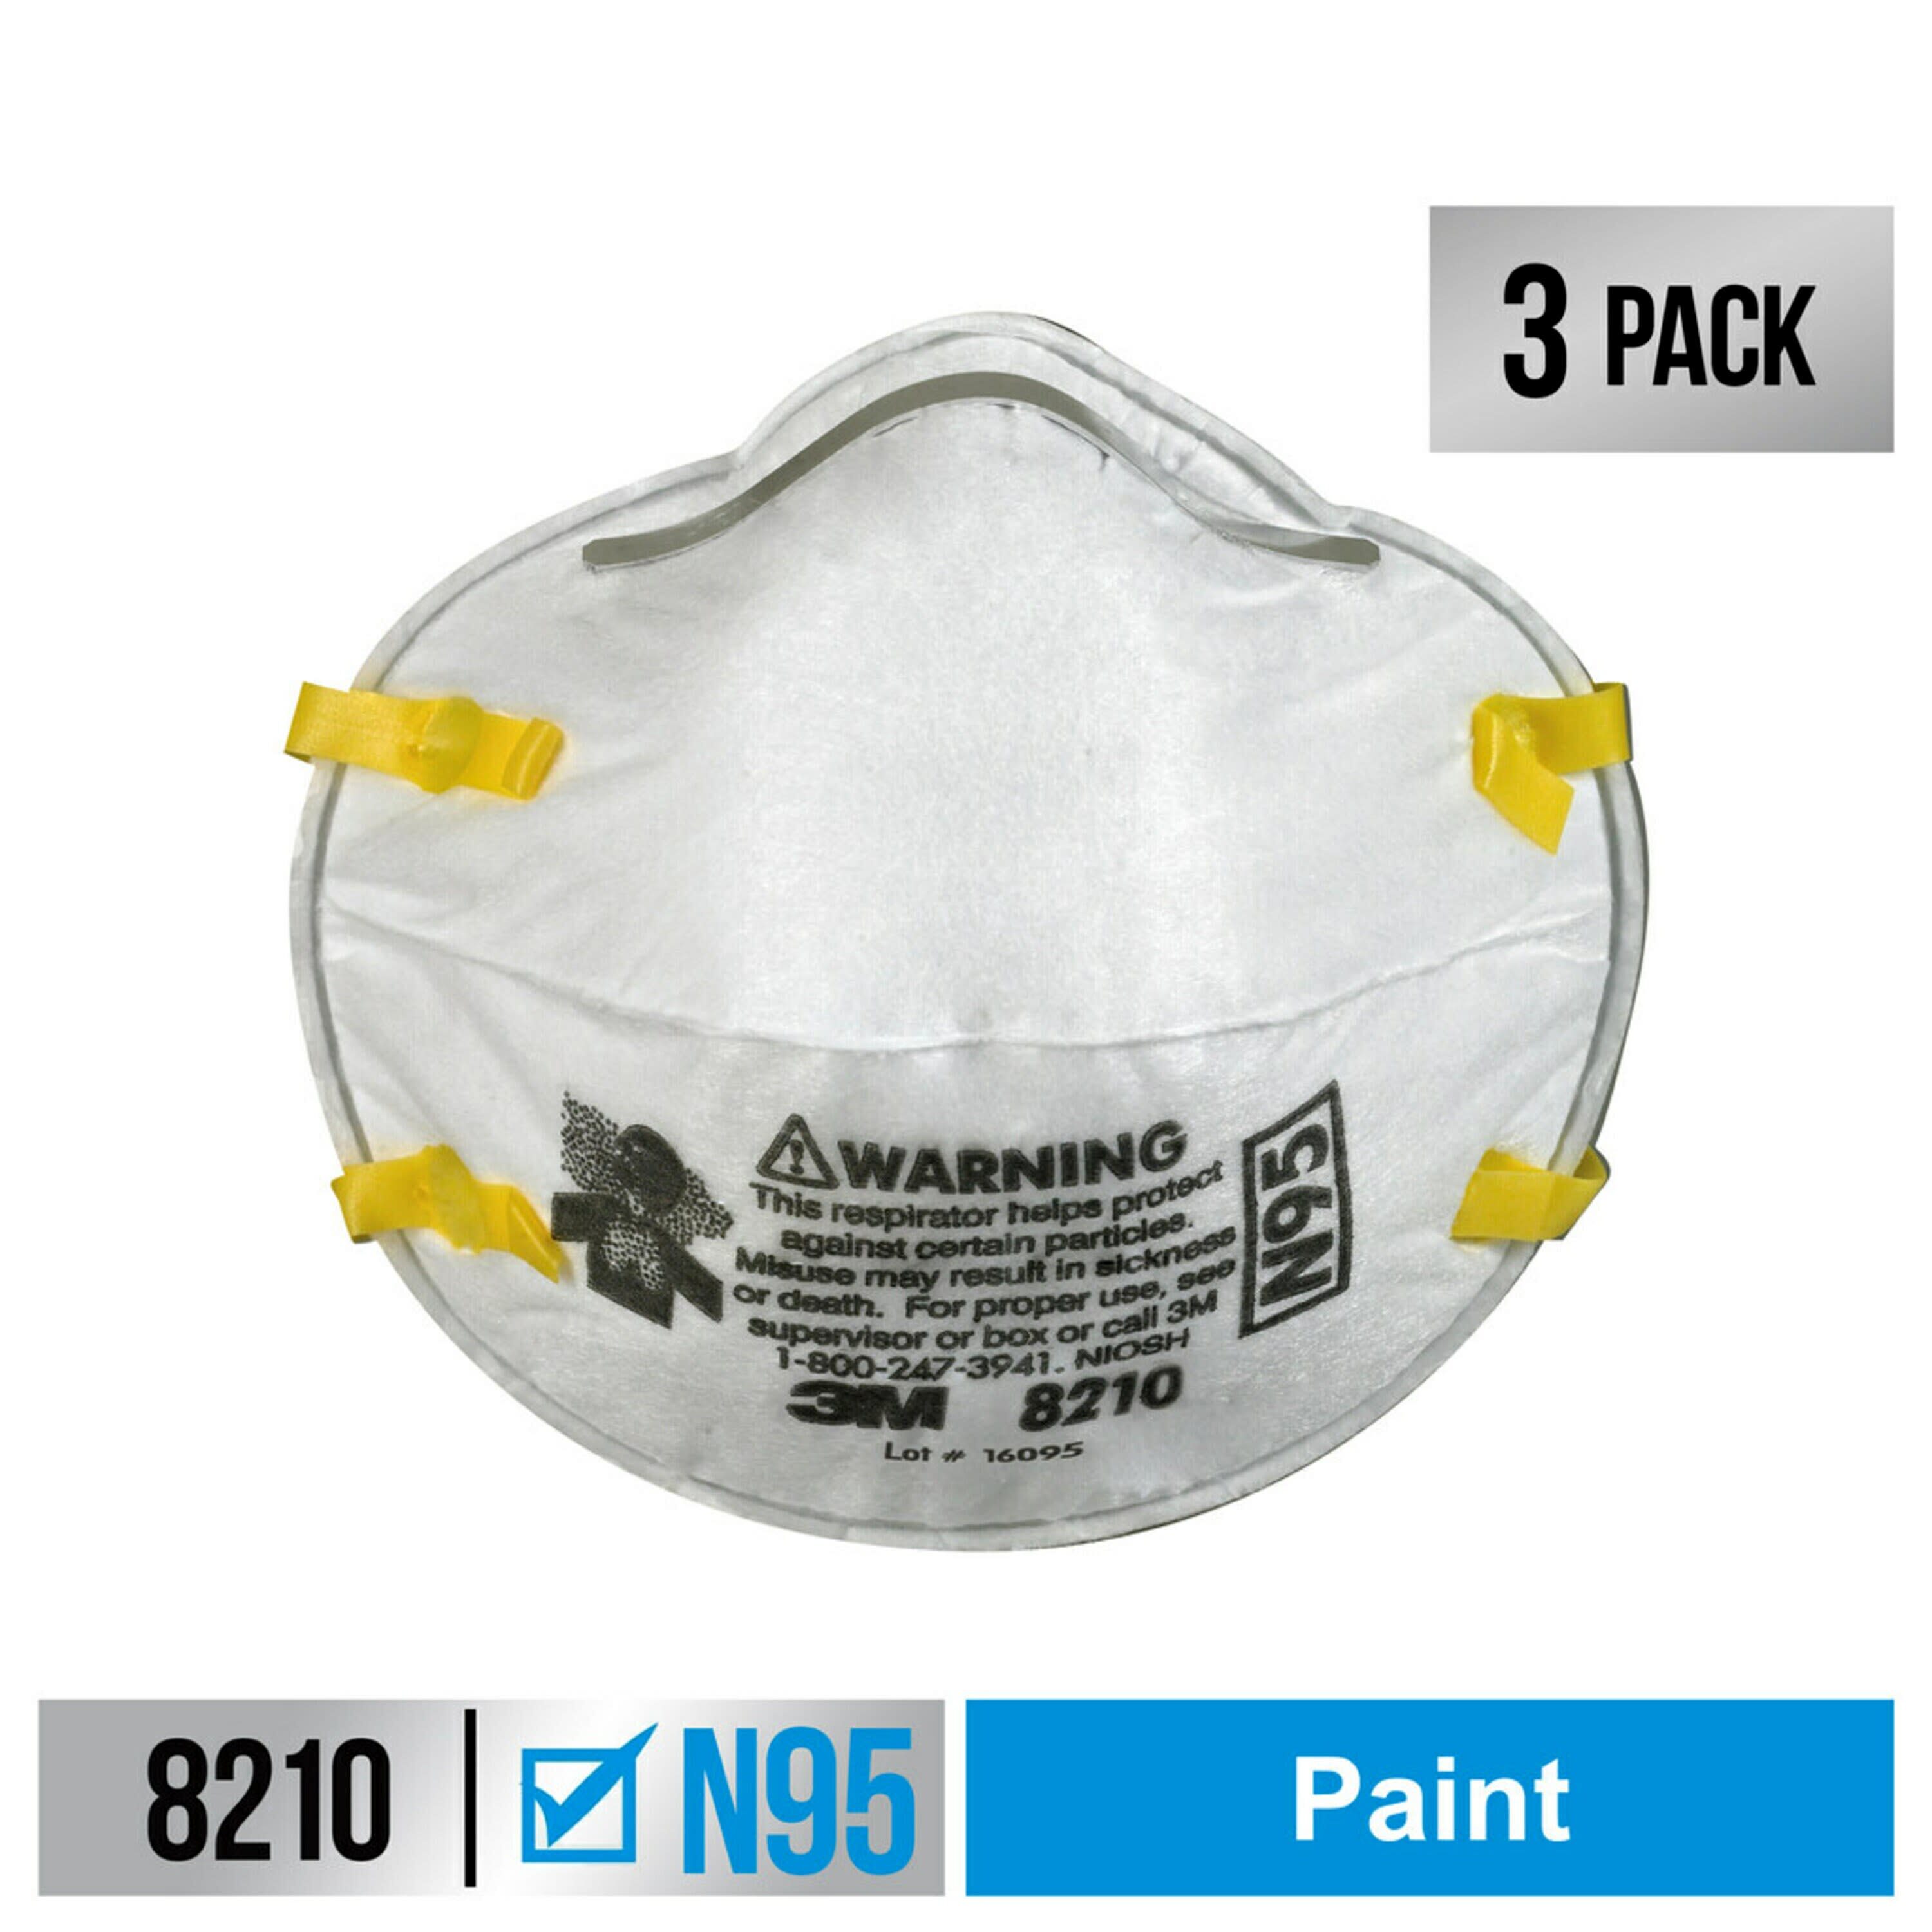 Disposable respirator Painting Respiratory Protection at Lowes.com